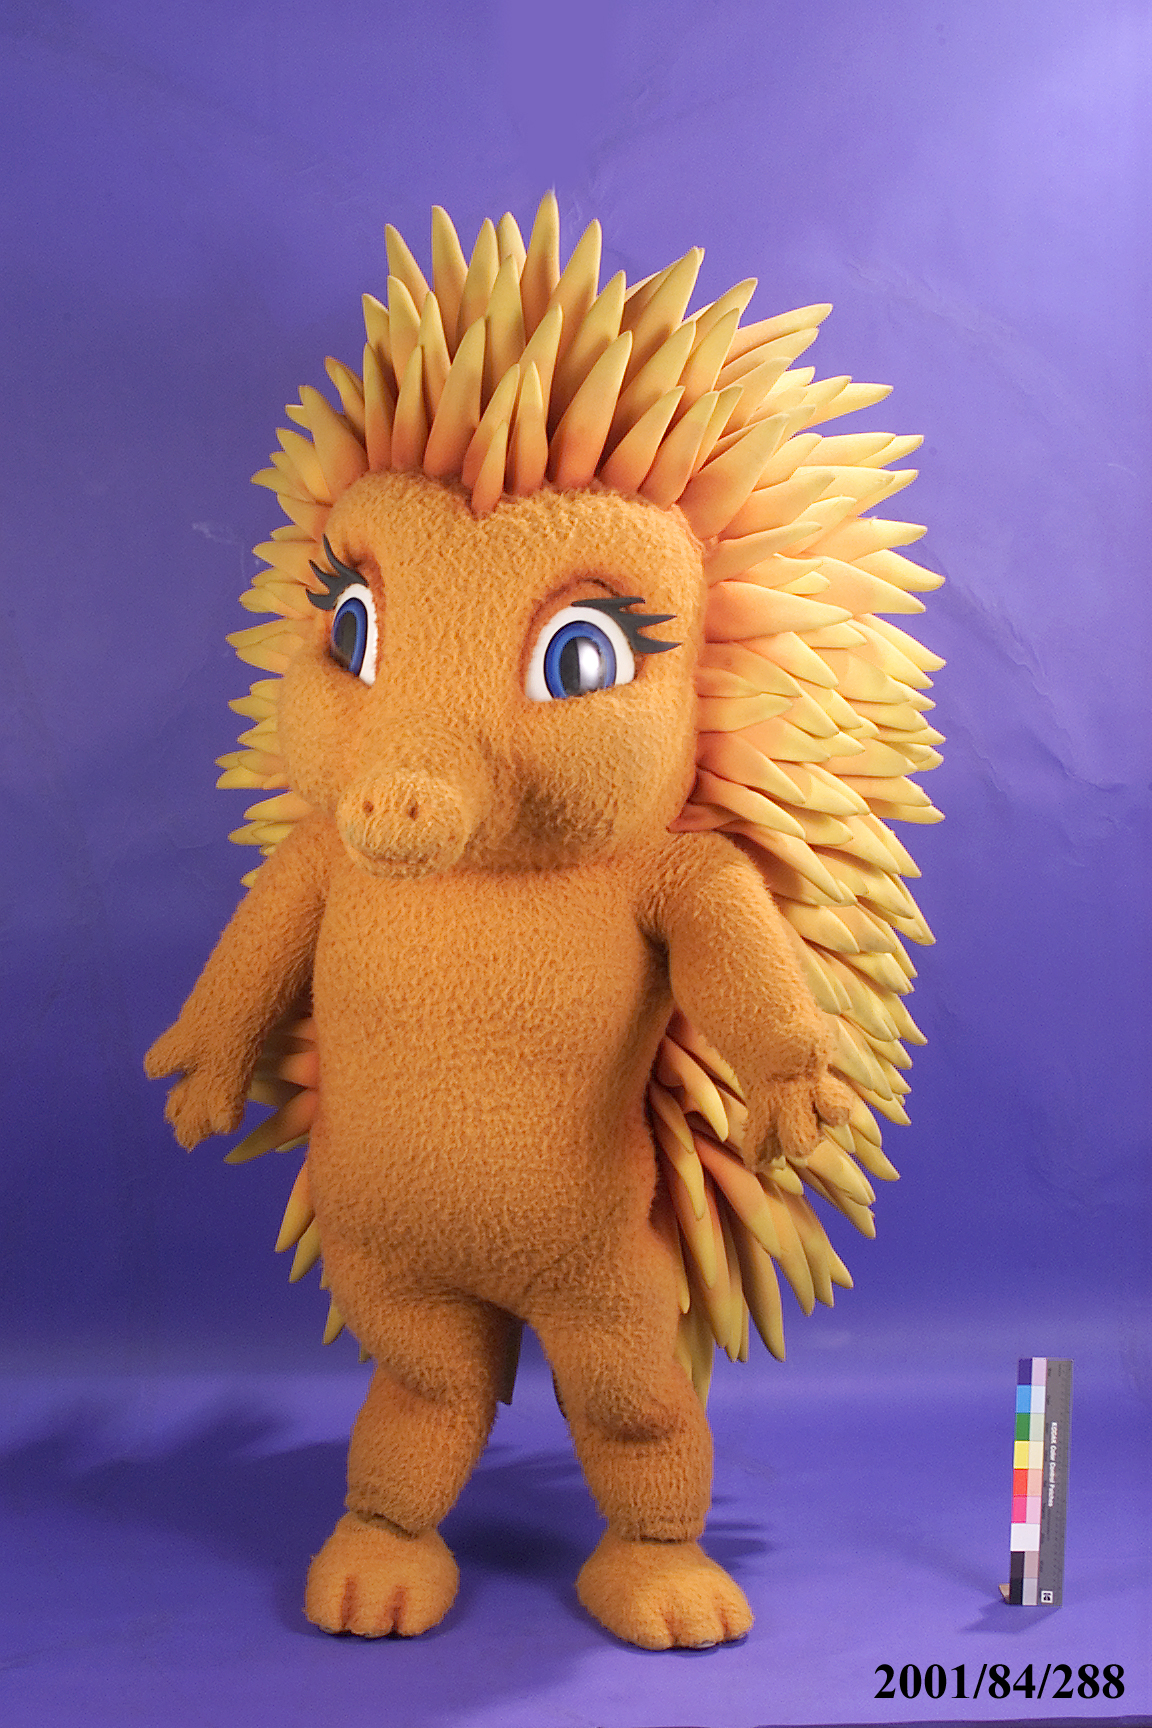 'Millie' mascot costume for promoting the Sydney Olympic Games